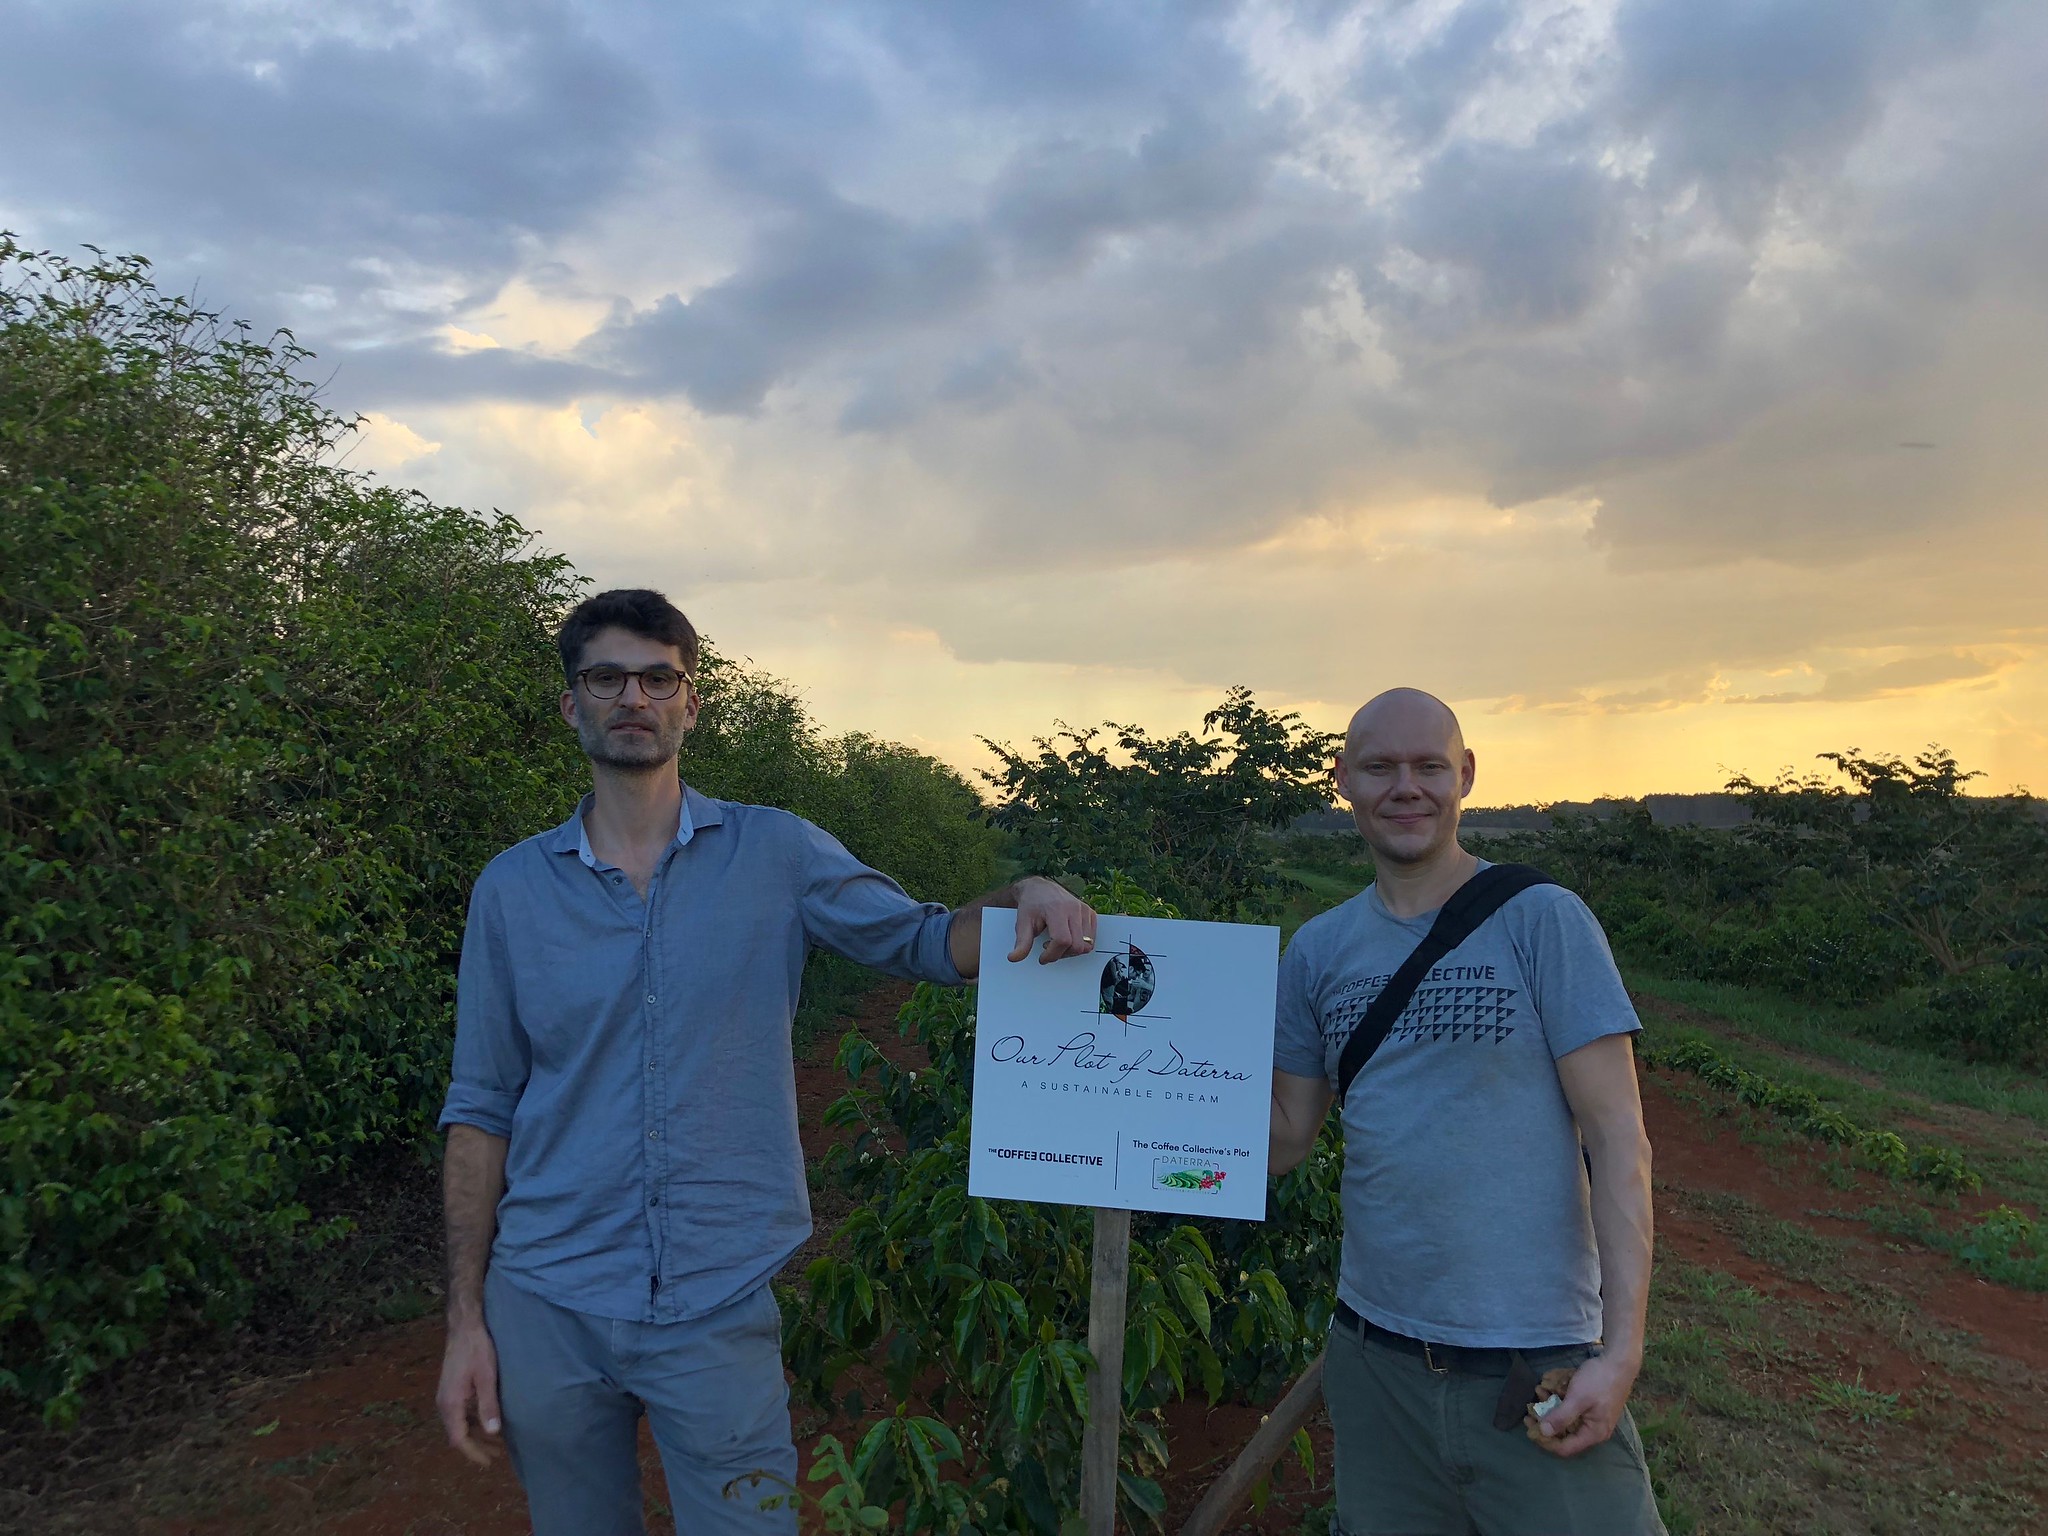 Peter Dupont (Left) and Samuli Marila visiting Our Plot